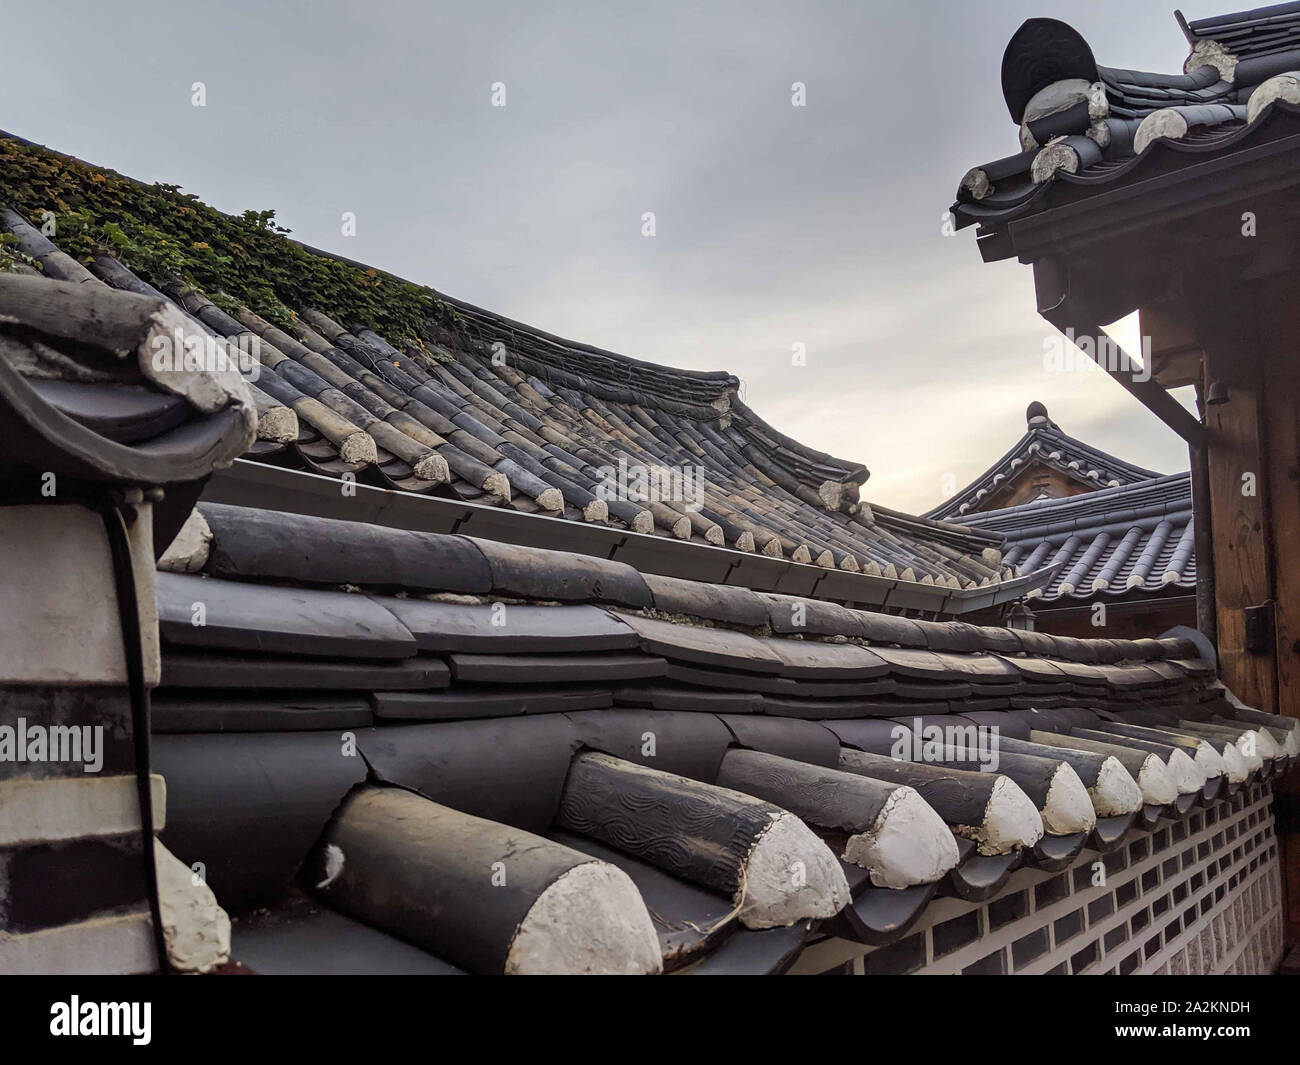 https://c8.alamy.com/comp/2A2KNDH/traditional-korean-decor-roof-of-village-house-in-palace-seoul-south-korea-2A2KNDH.jpg